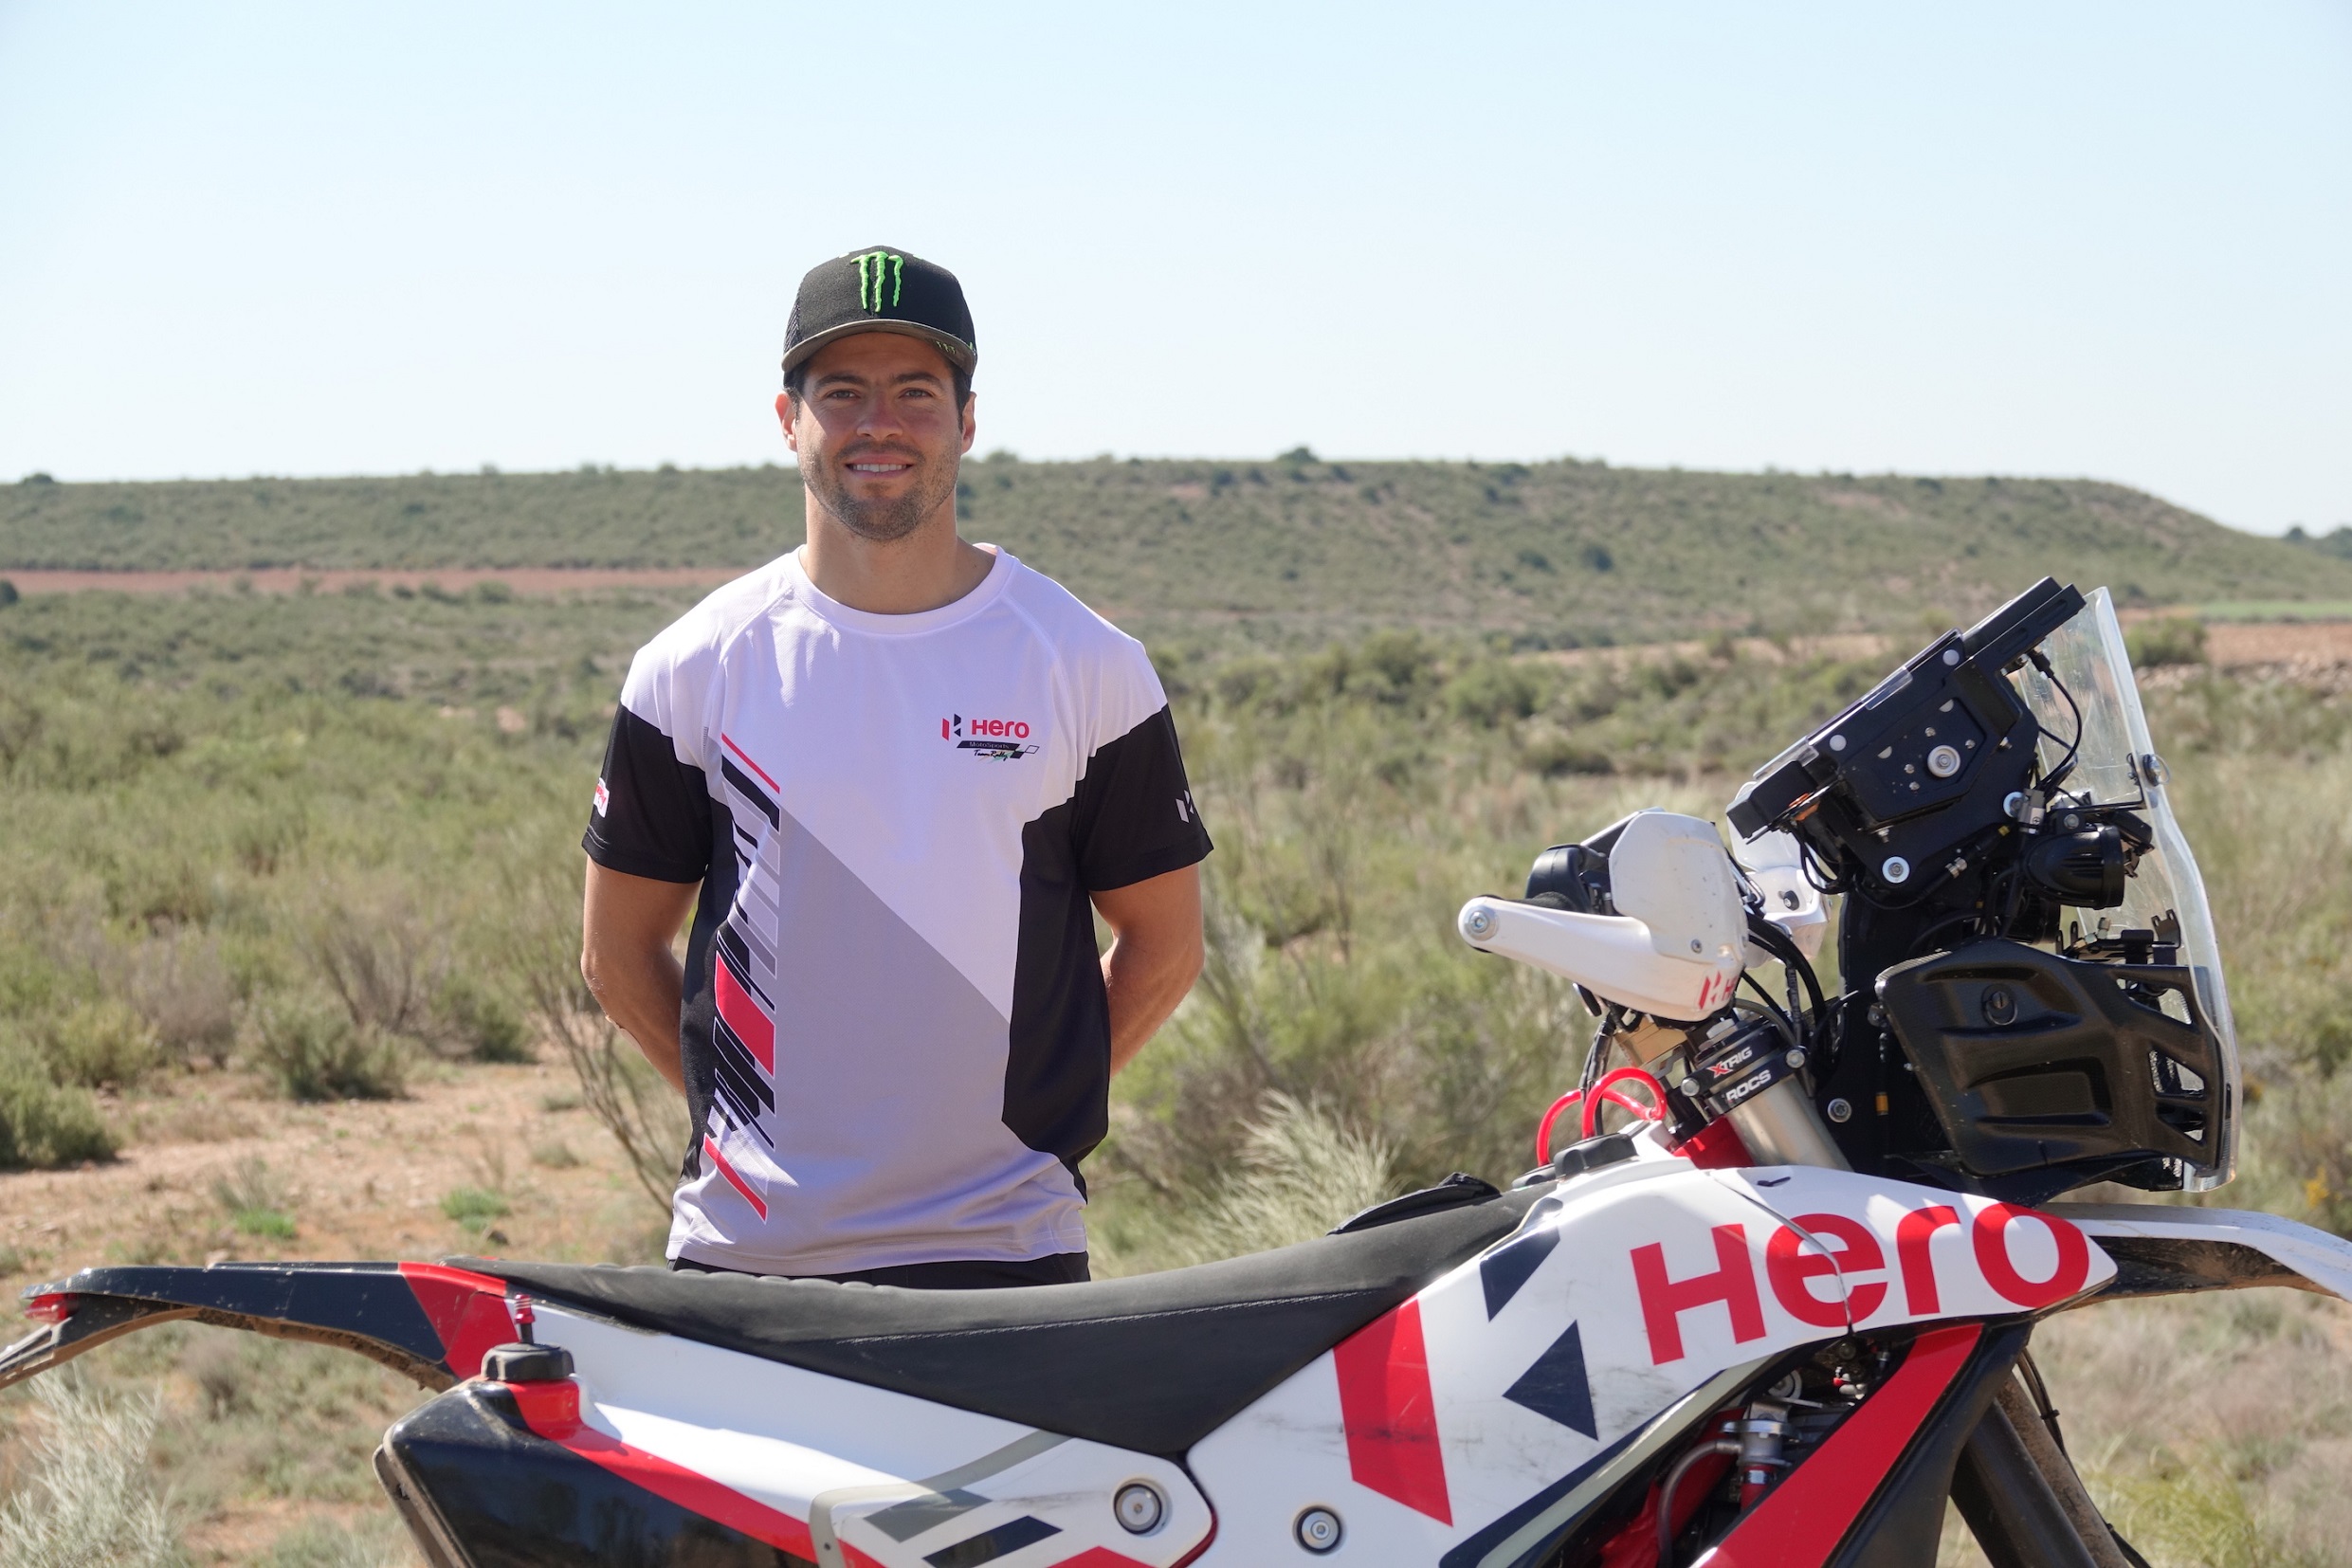 HERO MOTOSPORTS TEAM RALLY GEARS-UP FOR THE SEASON   ROPES IN ARGENTINE FRANCO CAIMI AS ITS FOURTH RIDER